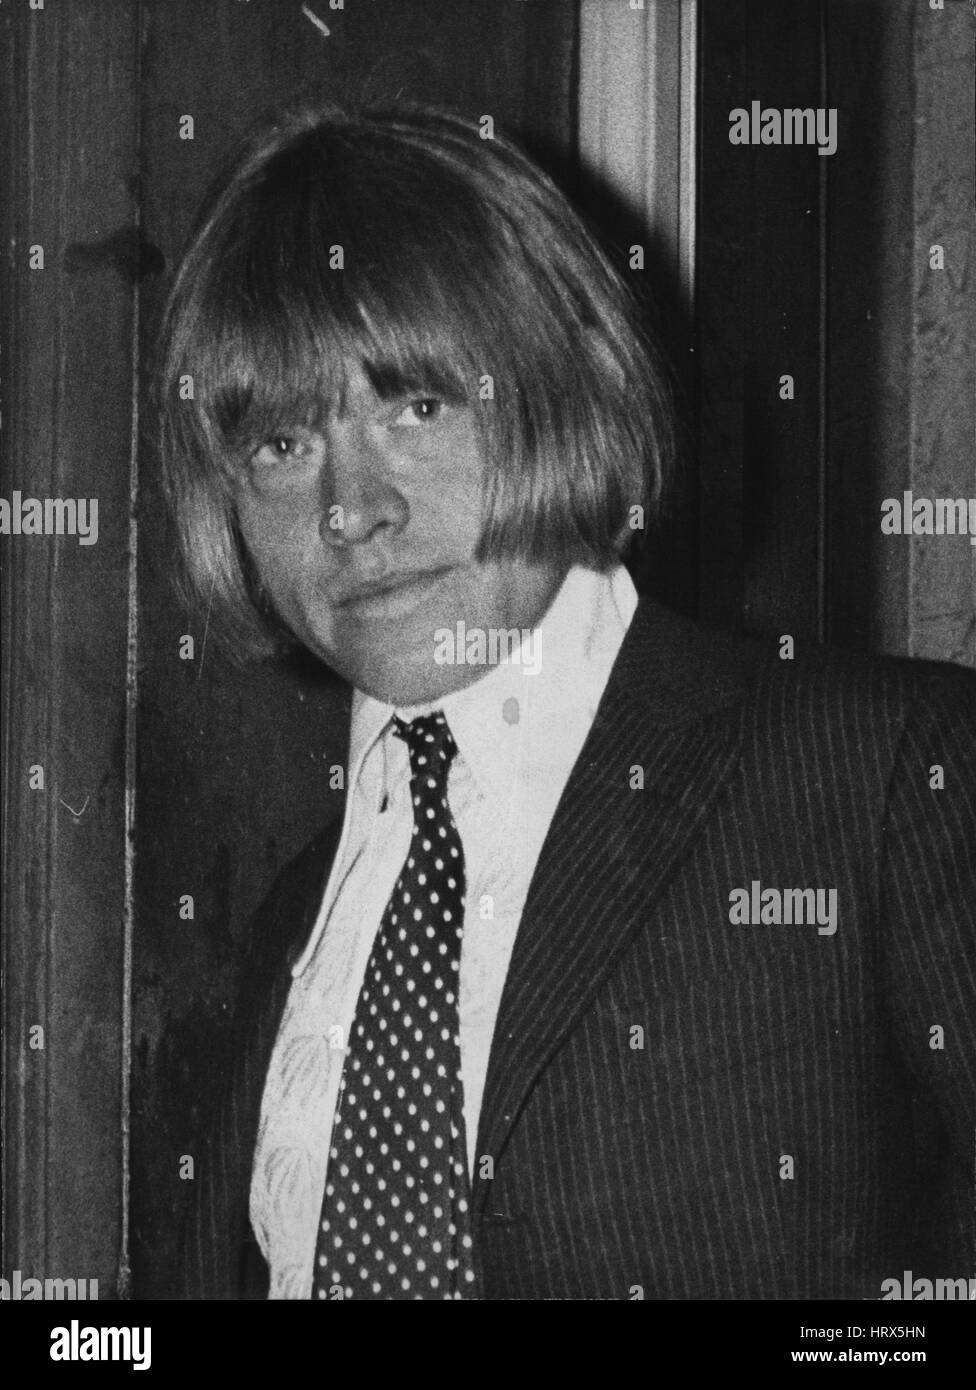 Jul. 07, 1969 - Brian Jones found dead: Brian Jones, who recently left the Rolling Stones pop group, was found dead eary today in his open-air swimming pool at his &pound;30,000 country home at Hartfield, Sussex. He is believed to have died during a midnight swim, apparently as the result of an asthma attack. photo shows Brian Jones-Who was found dead early today. (Credit Image: © Keystone Press Agency/Keystone USA via ZUMAPRESS.com) Stock Photo